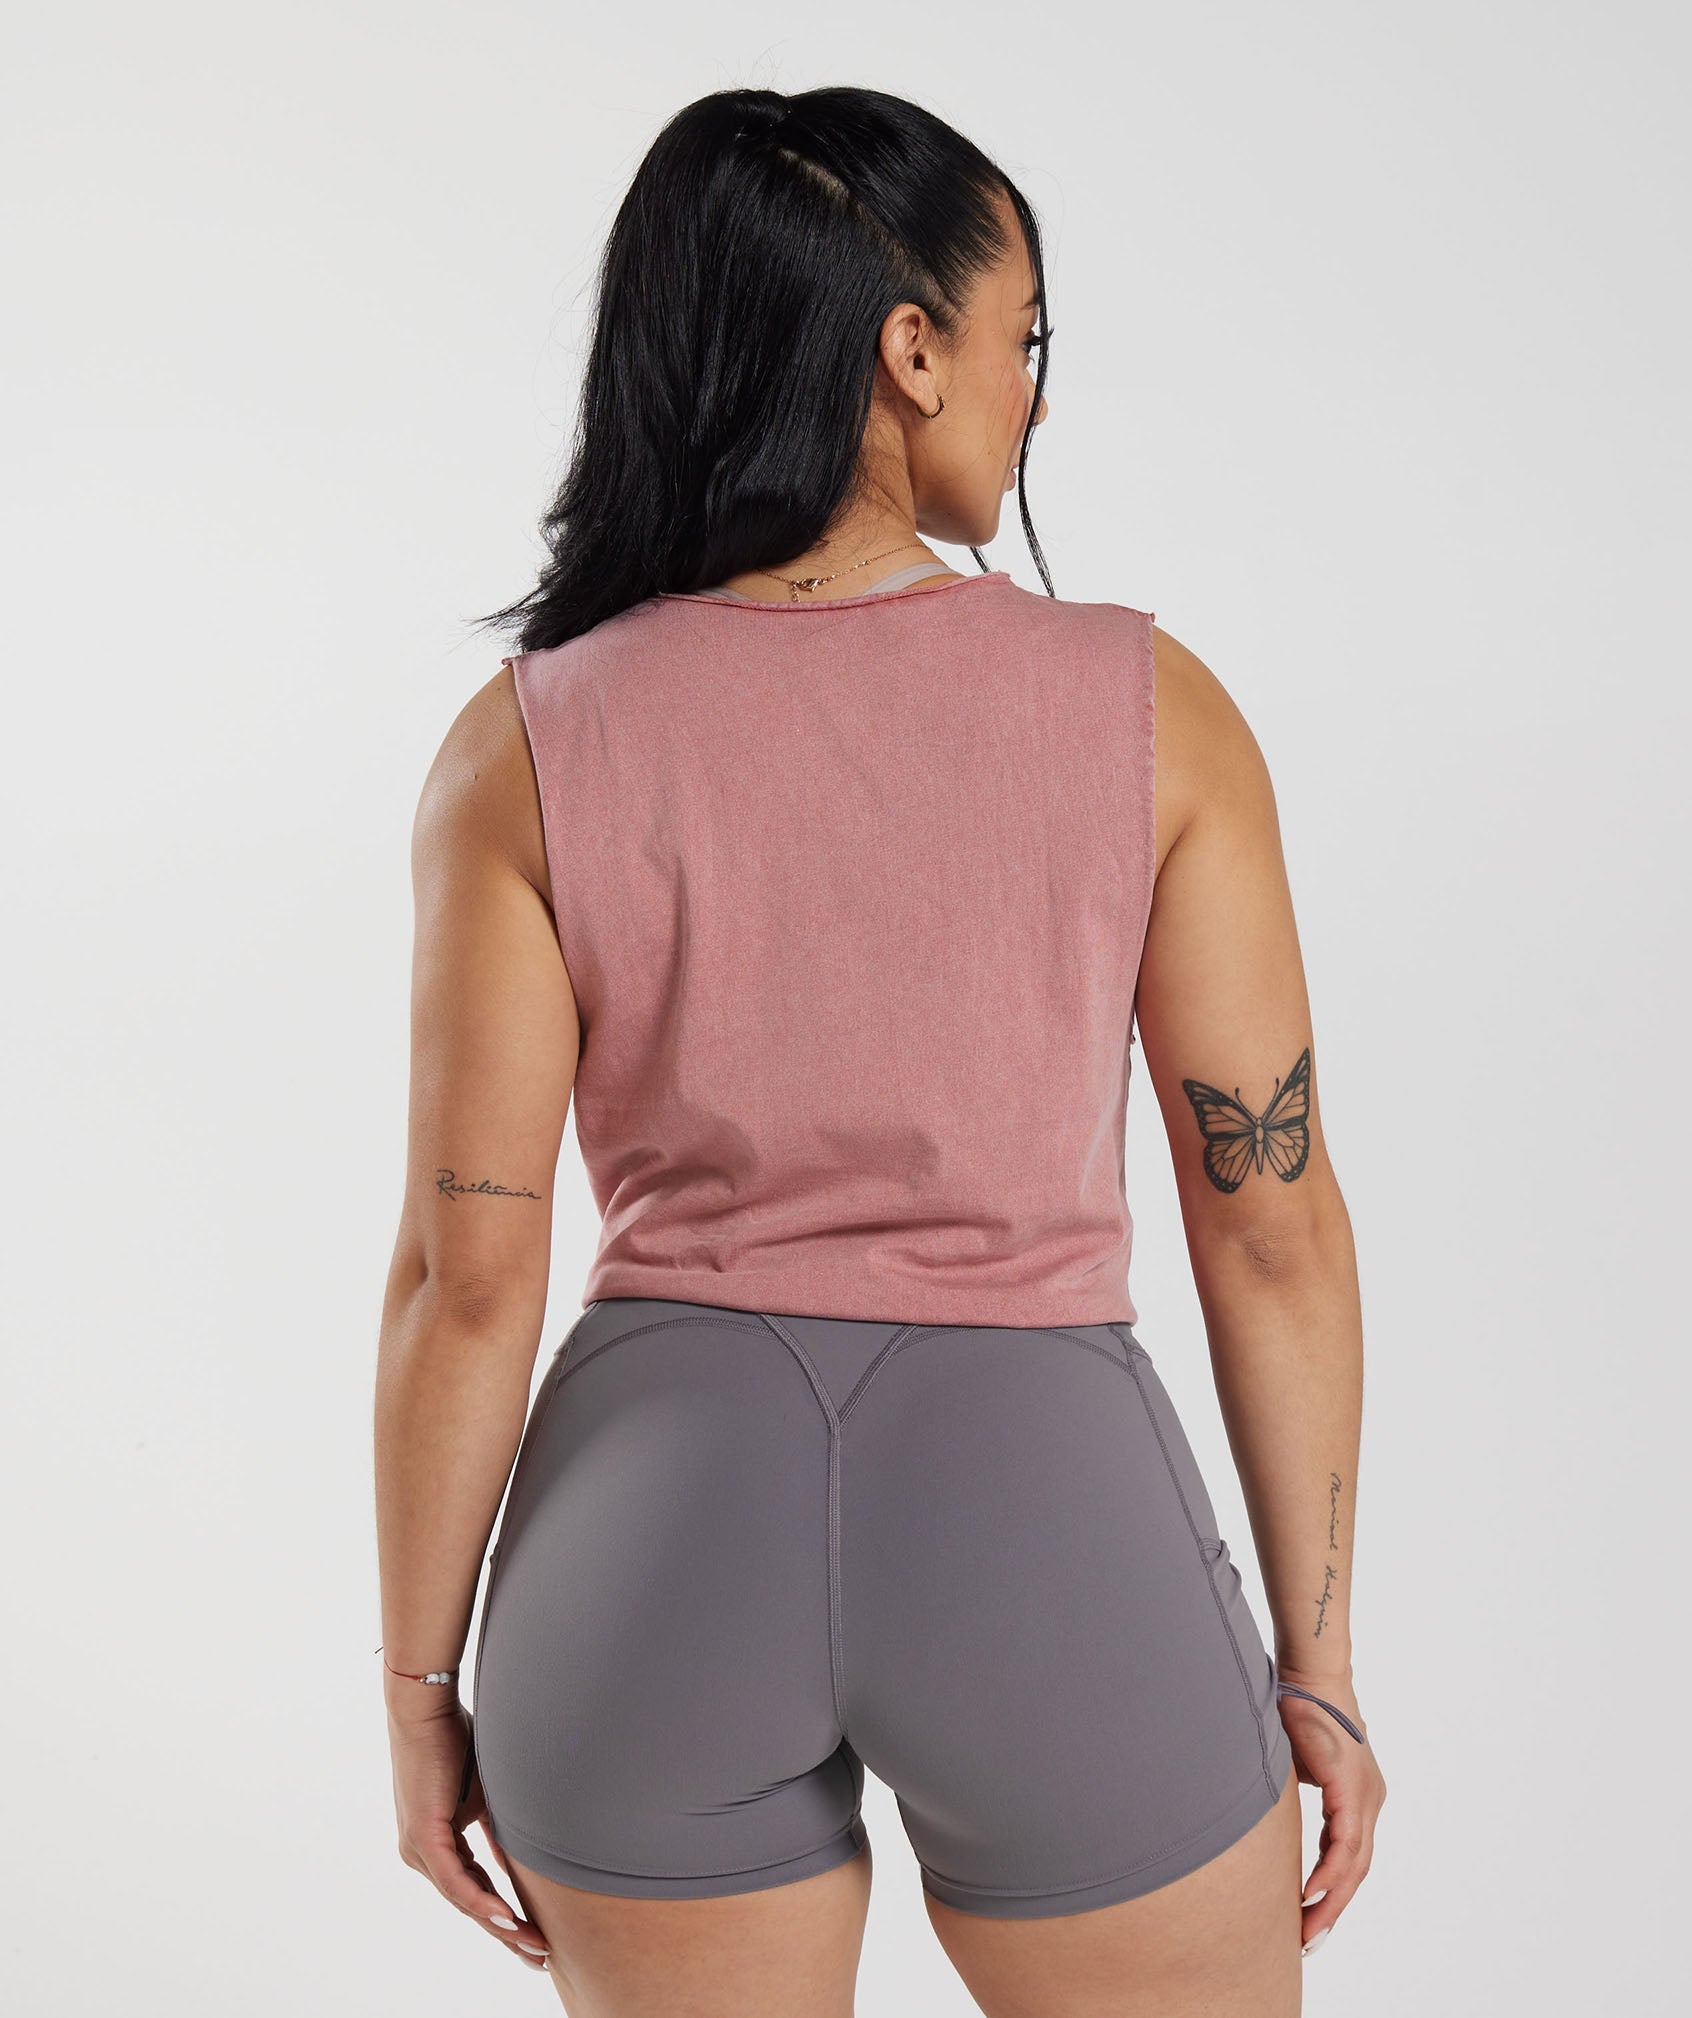 Gymshark Legacy Washed Crop Top - Raspberry Pink/Acid Wash Small